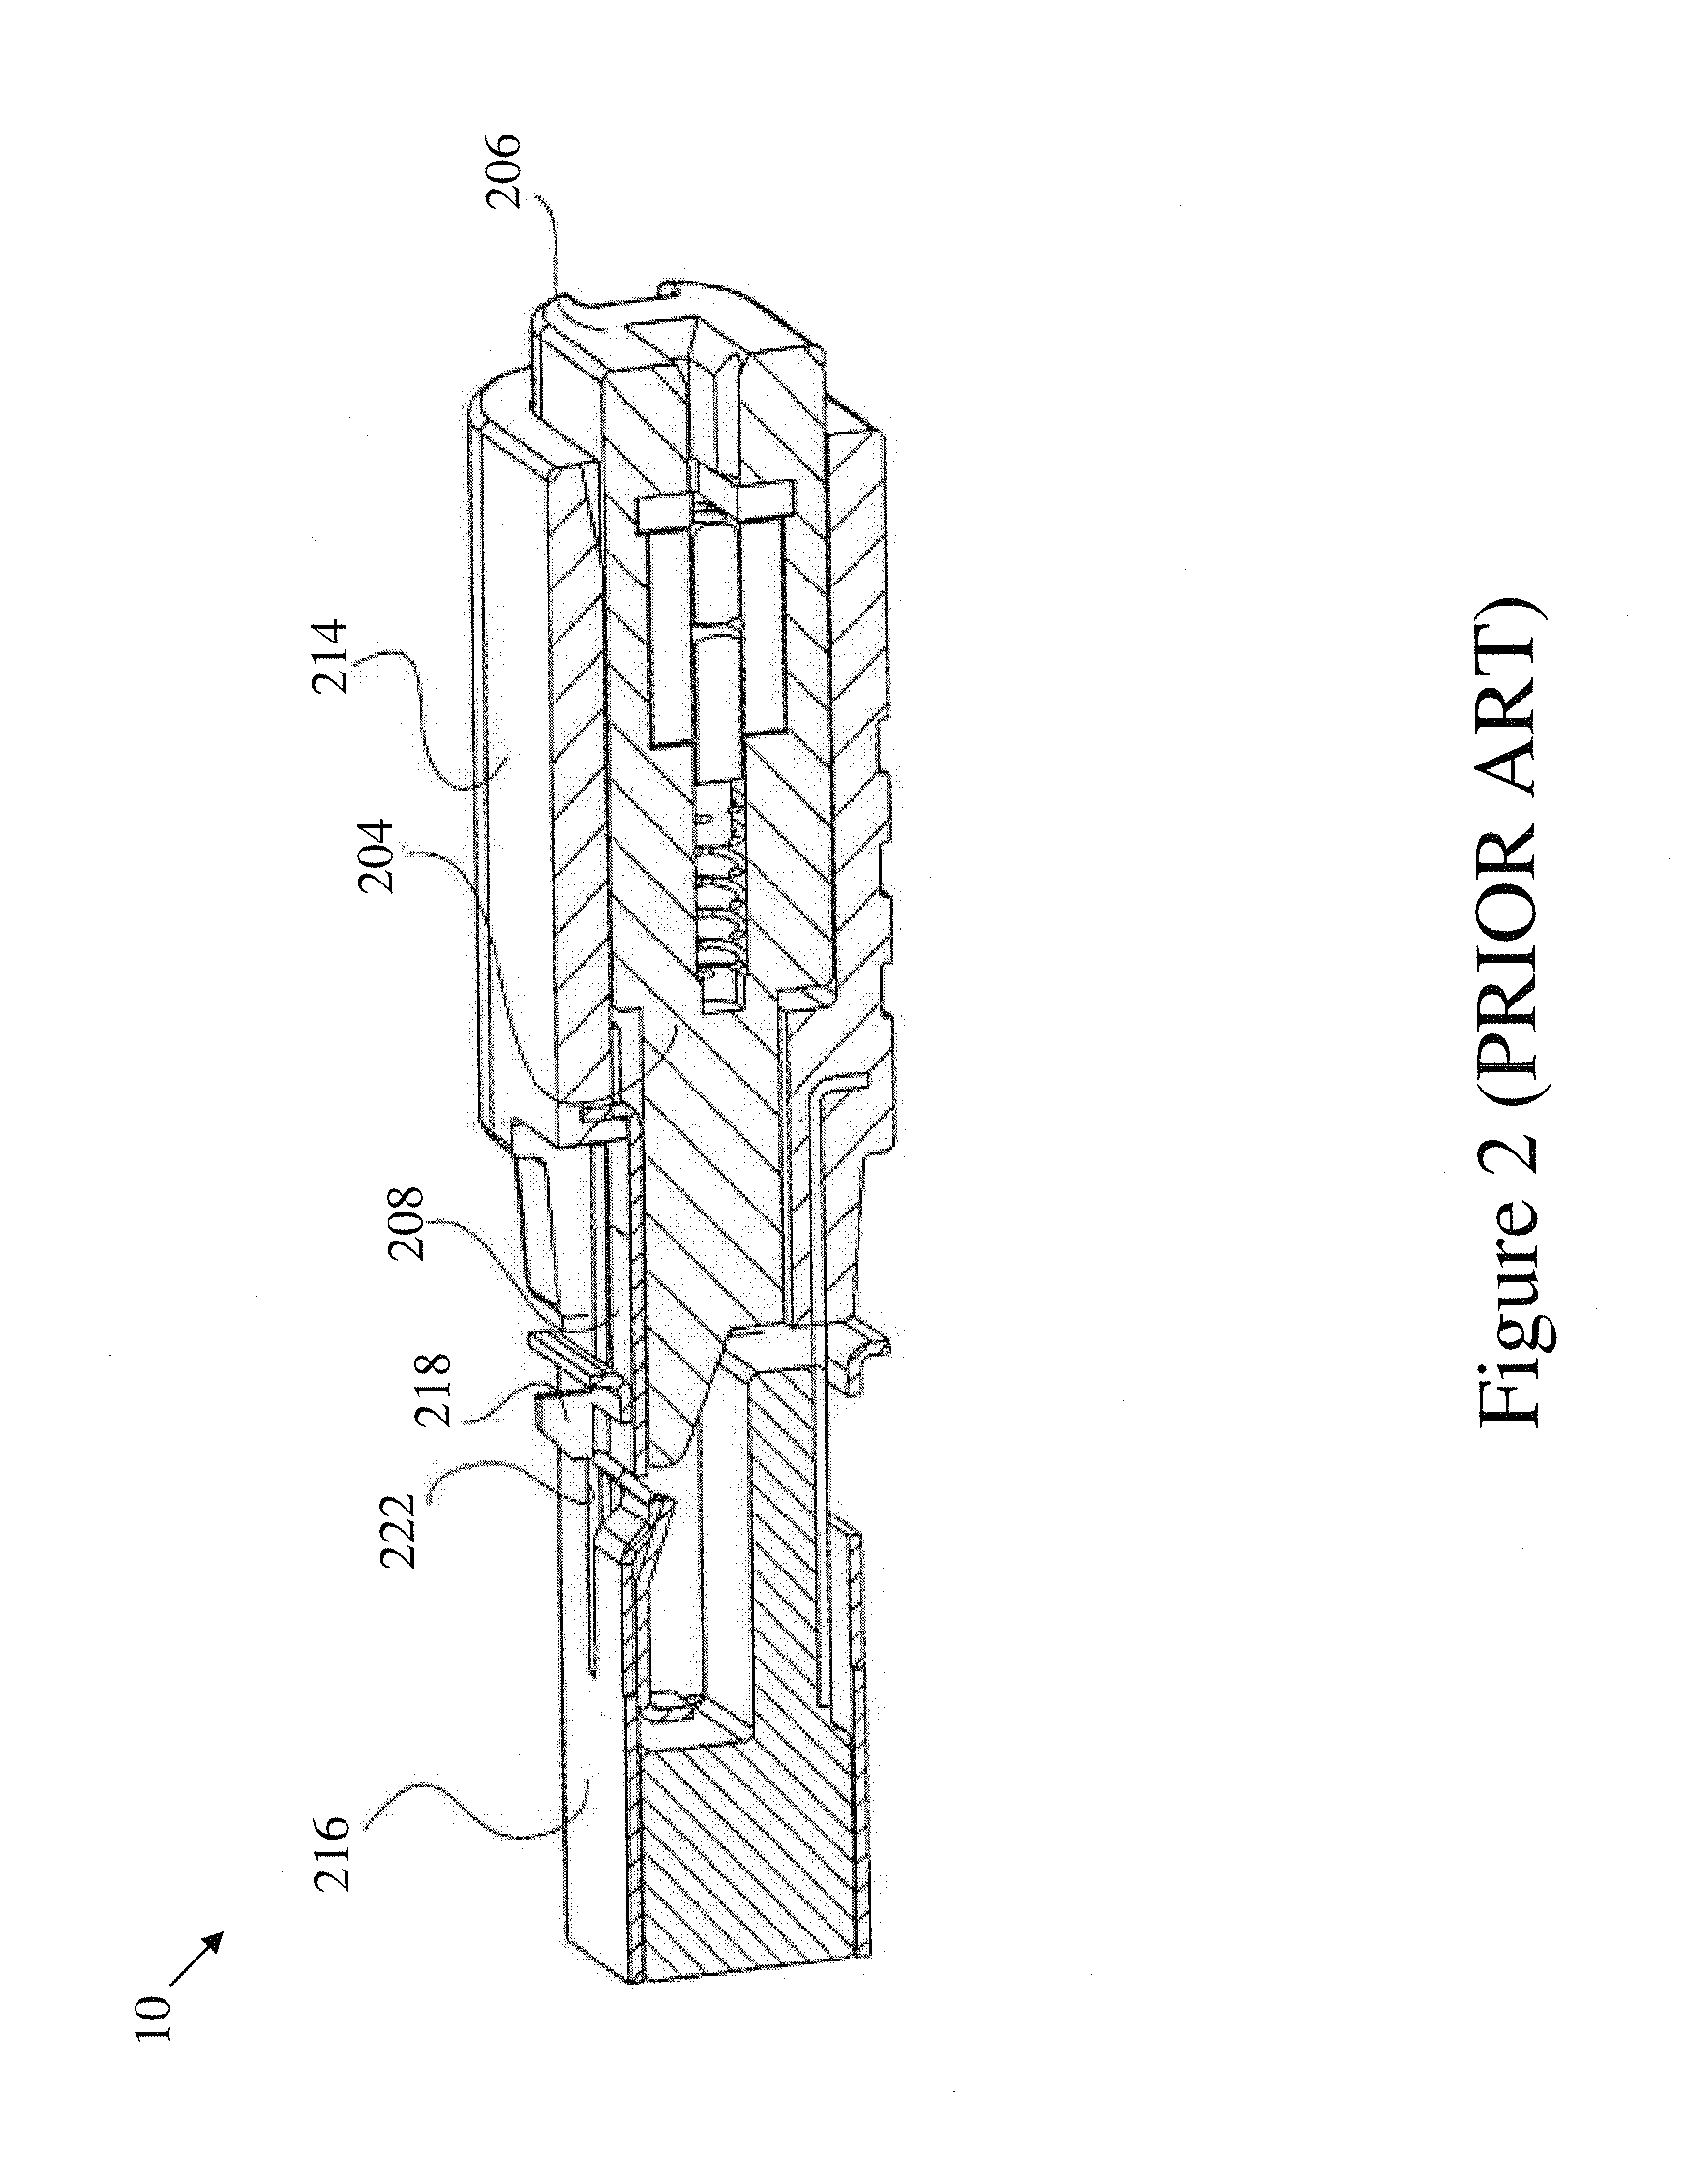 USB security device, apparatus, method and system